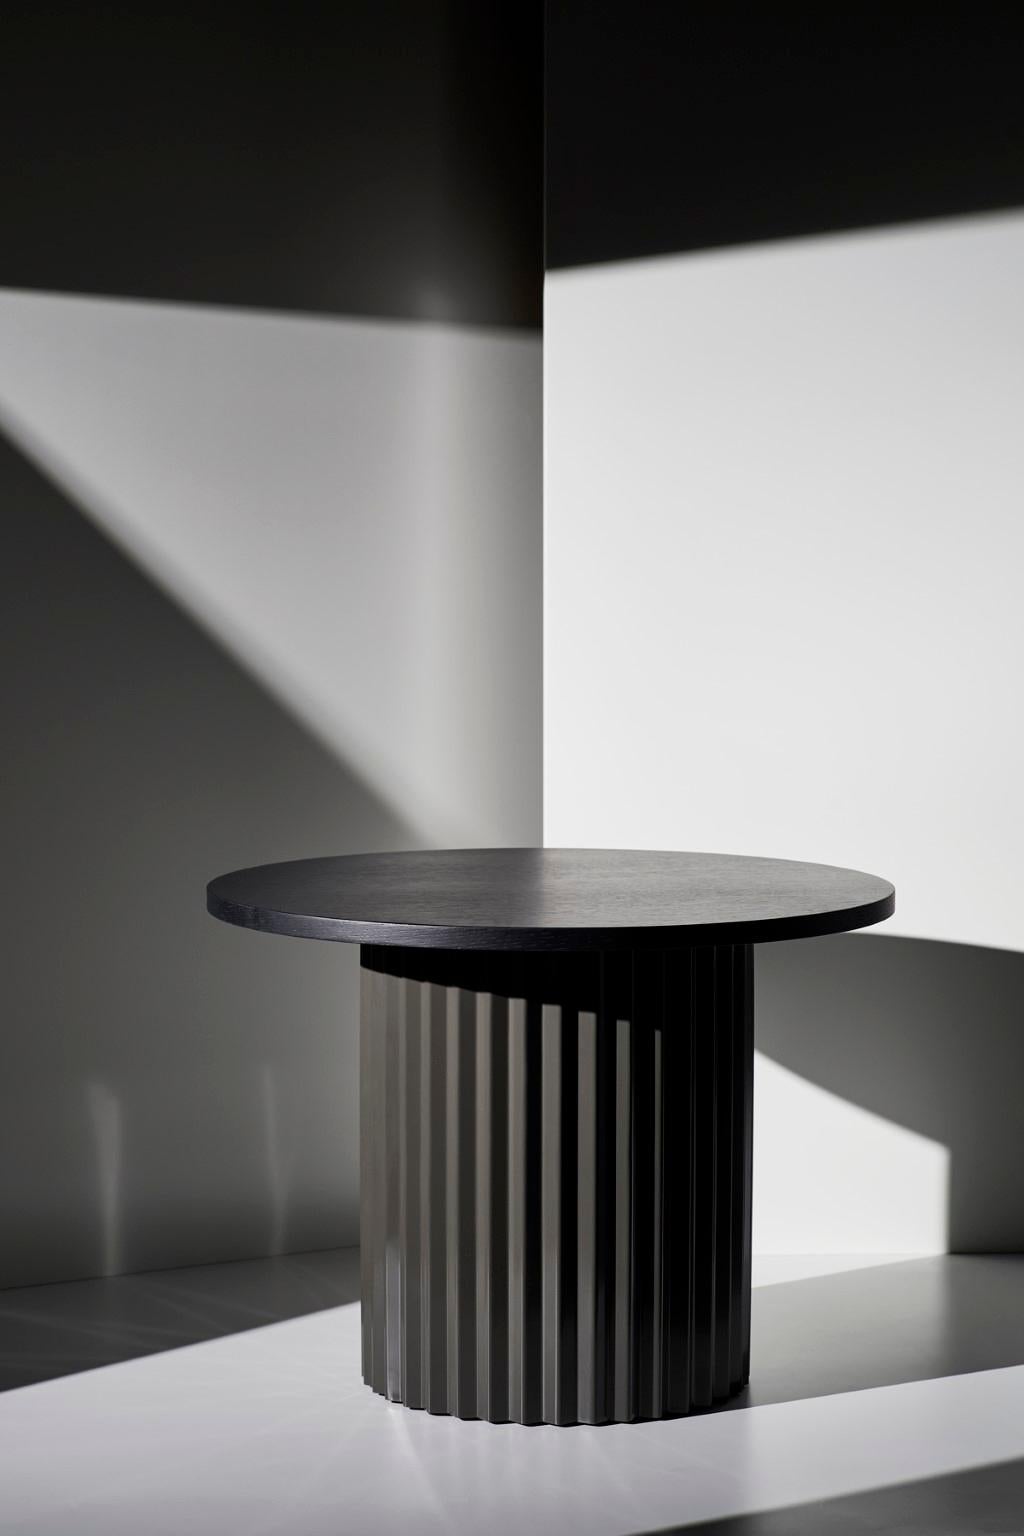 Set of 2 marble tables by Lisette Rützou
Dimensions: 
D 60 x H 41 cm
D 60 x H 41 cm
Materials: Marble tabletop, Brass Column

 Lisette Rützou’s design is motivated by an urge to articulate a story. Inspired by the beauty of materials, form and